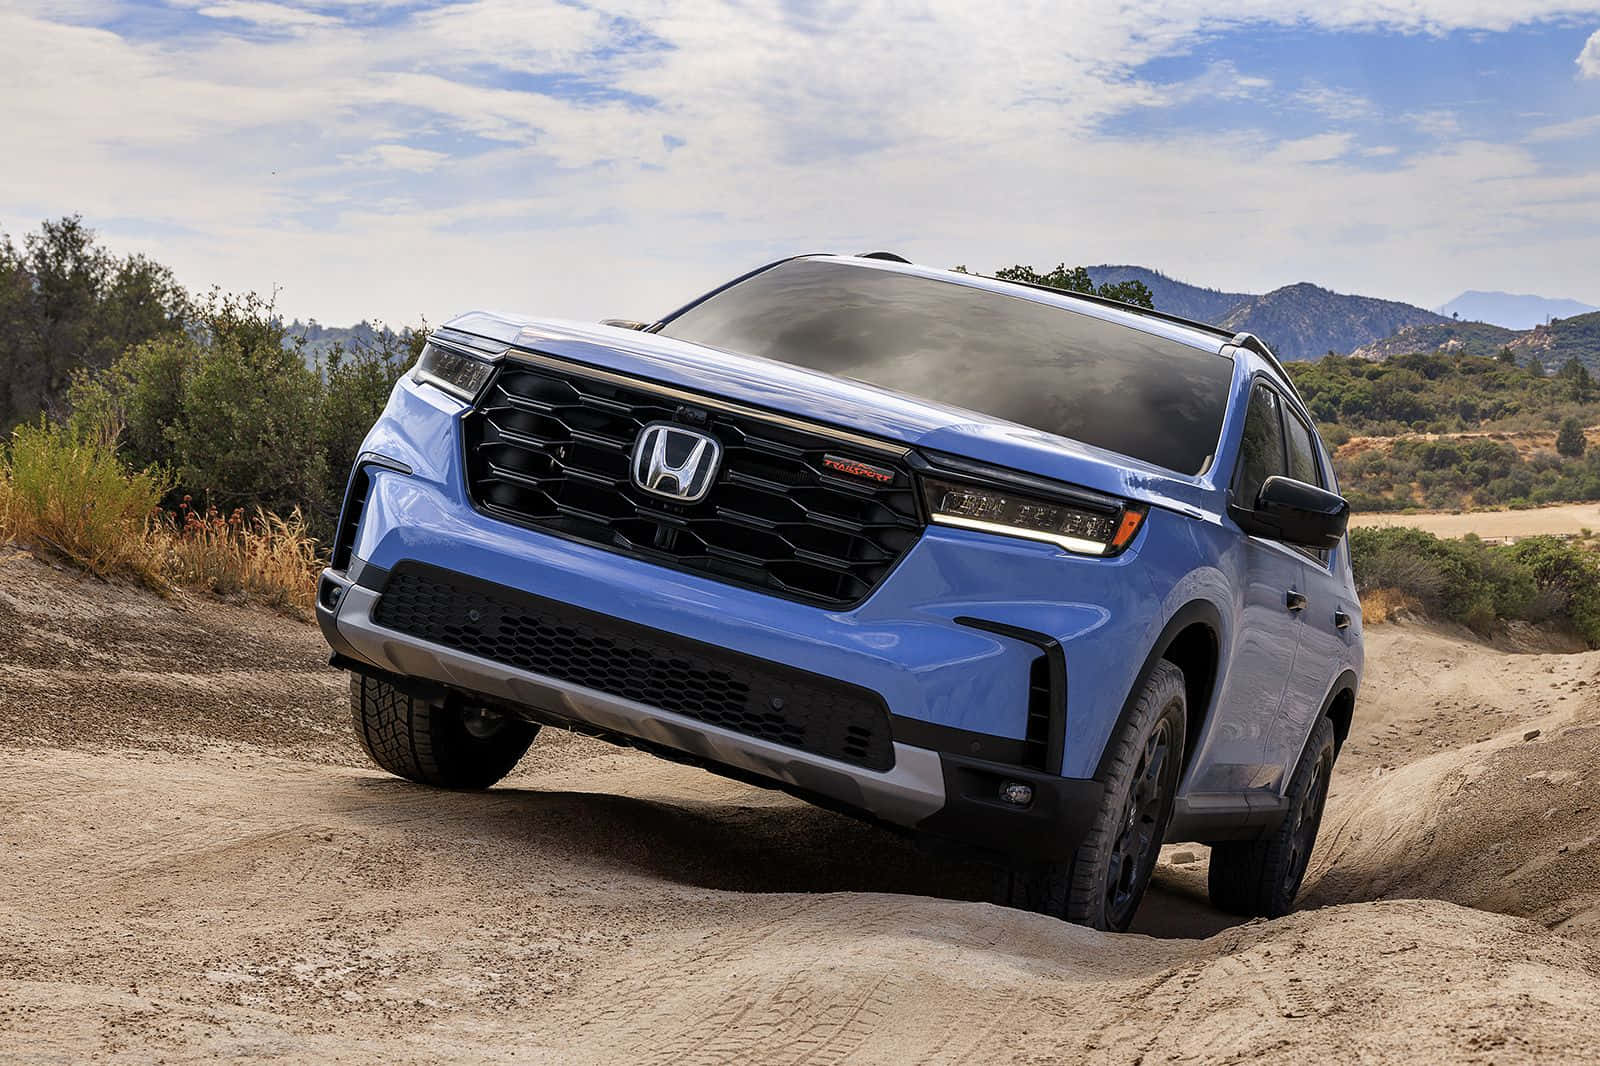 Making waves with the 2023 Honda Pilot